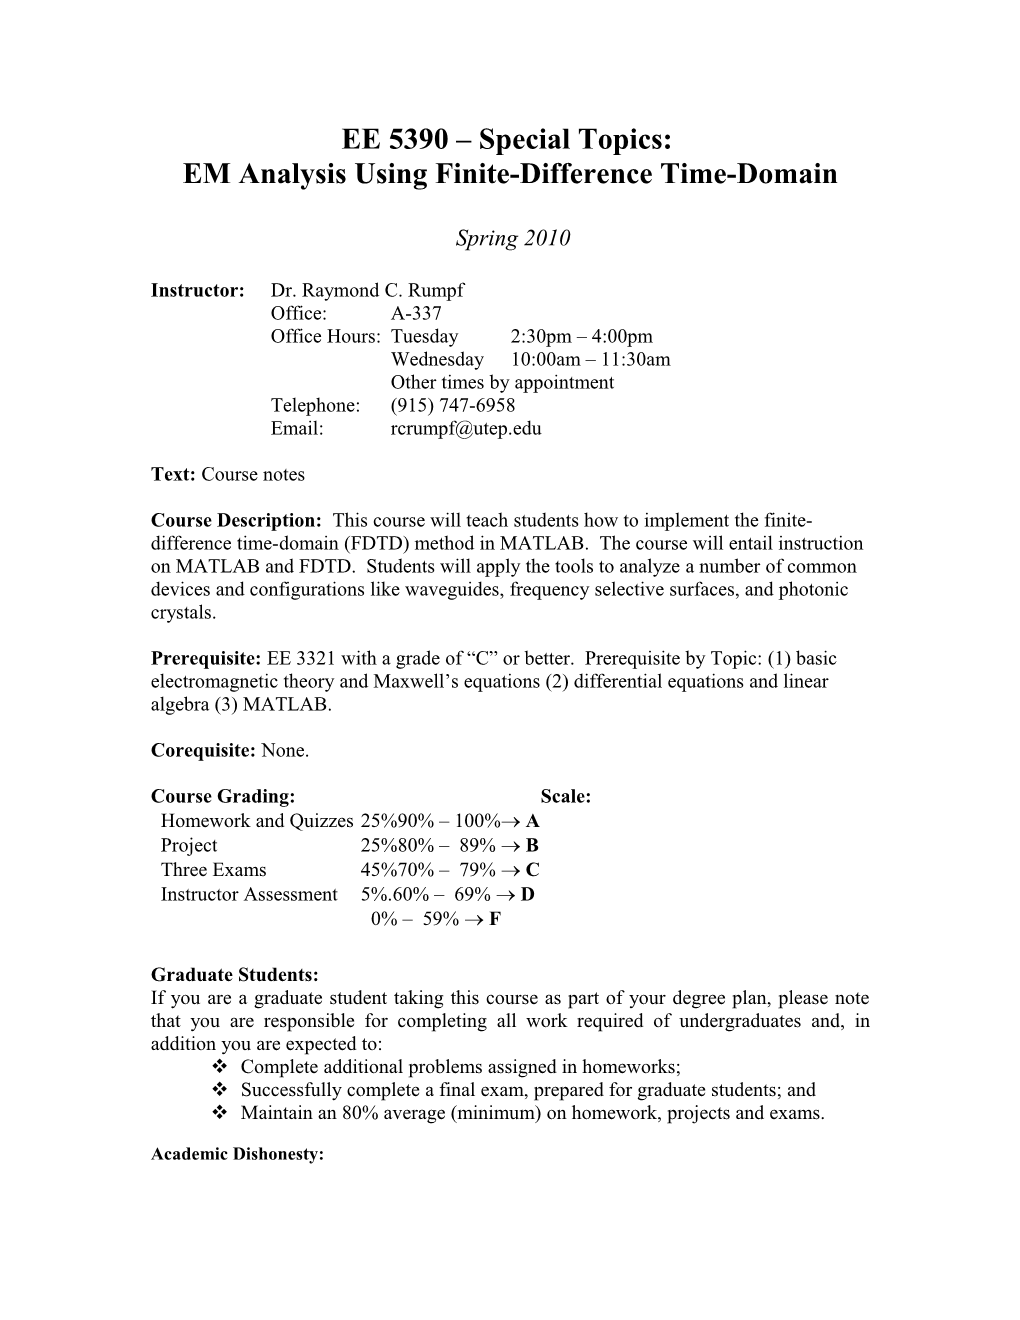 EE 5390 Special Topics: EM Analysis Using Finite-Difference Time-Domain